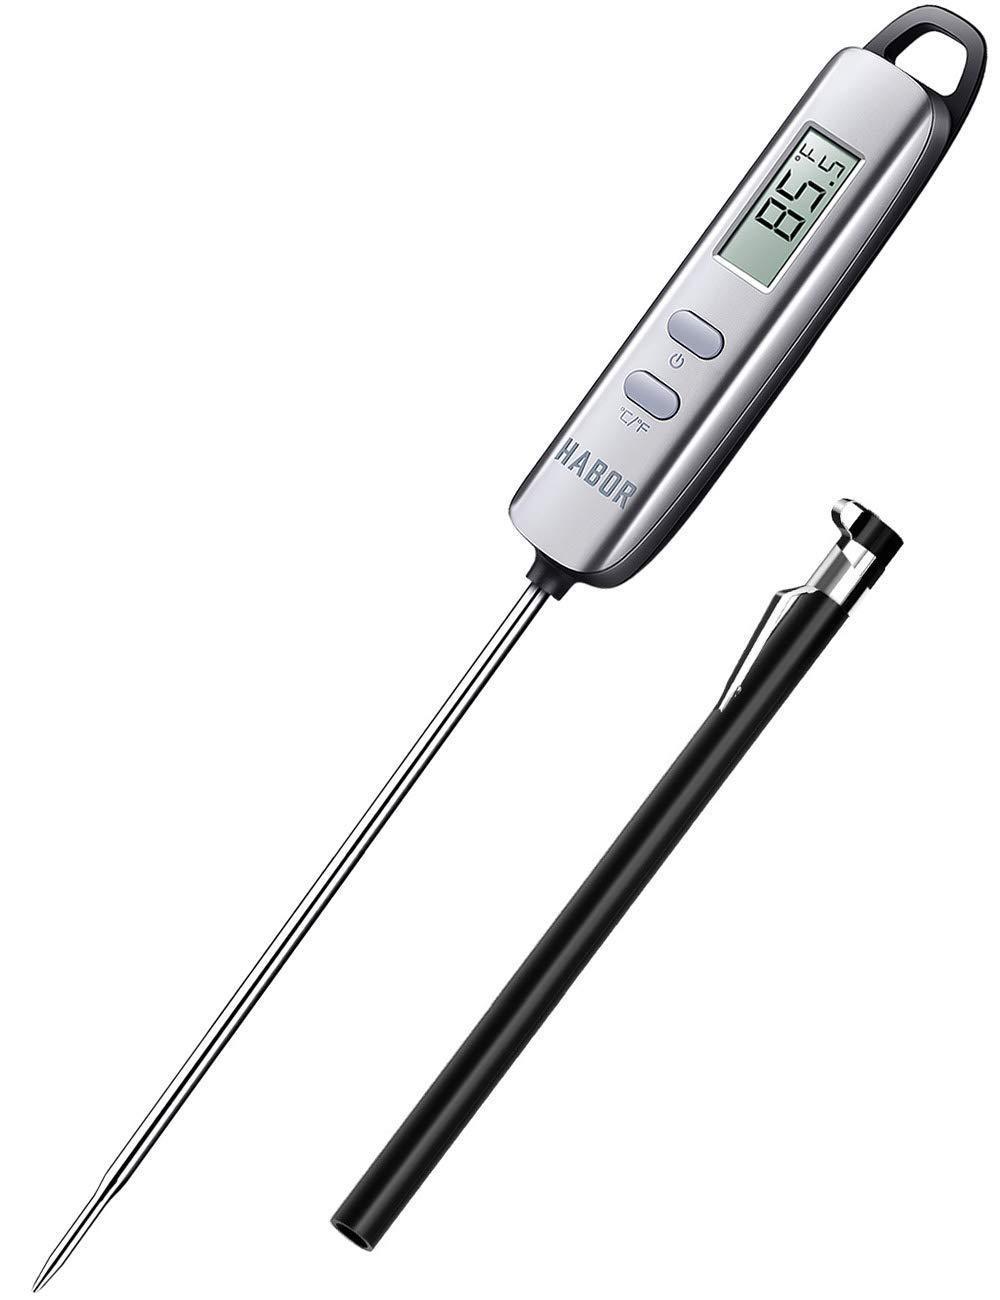 Habor 022 Meat Thermometer, FDA Approval 4.7 Inches Long Probe